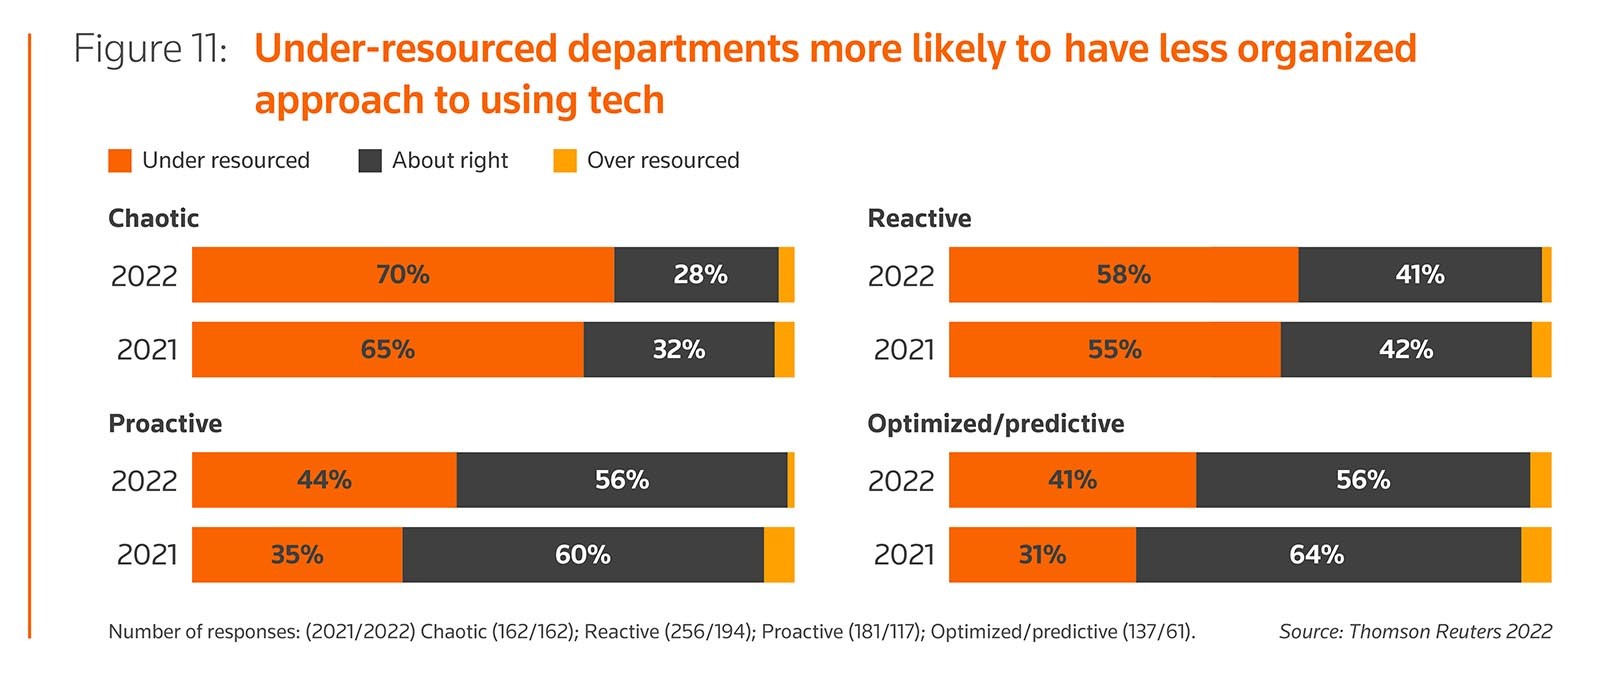 Figure 11: Under-resourced departments more likely to have less organized approach to using tech